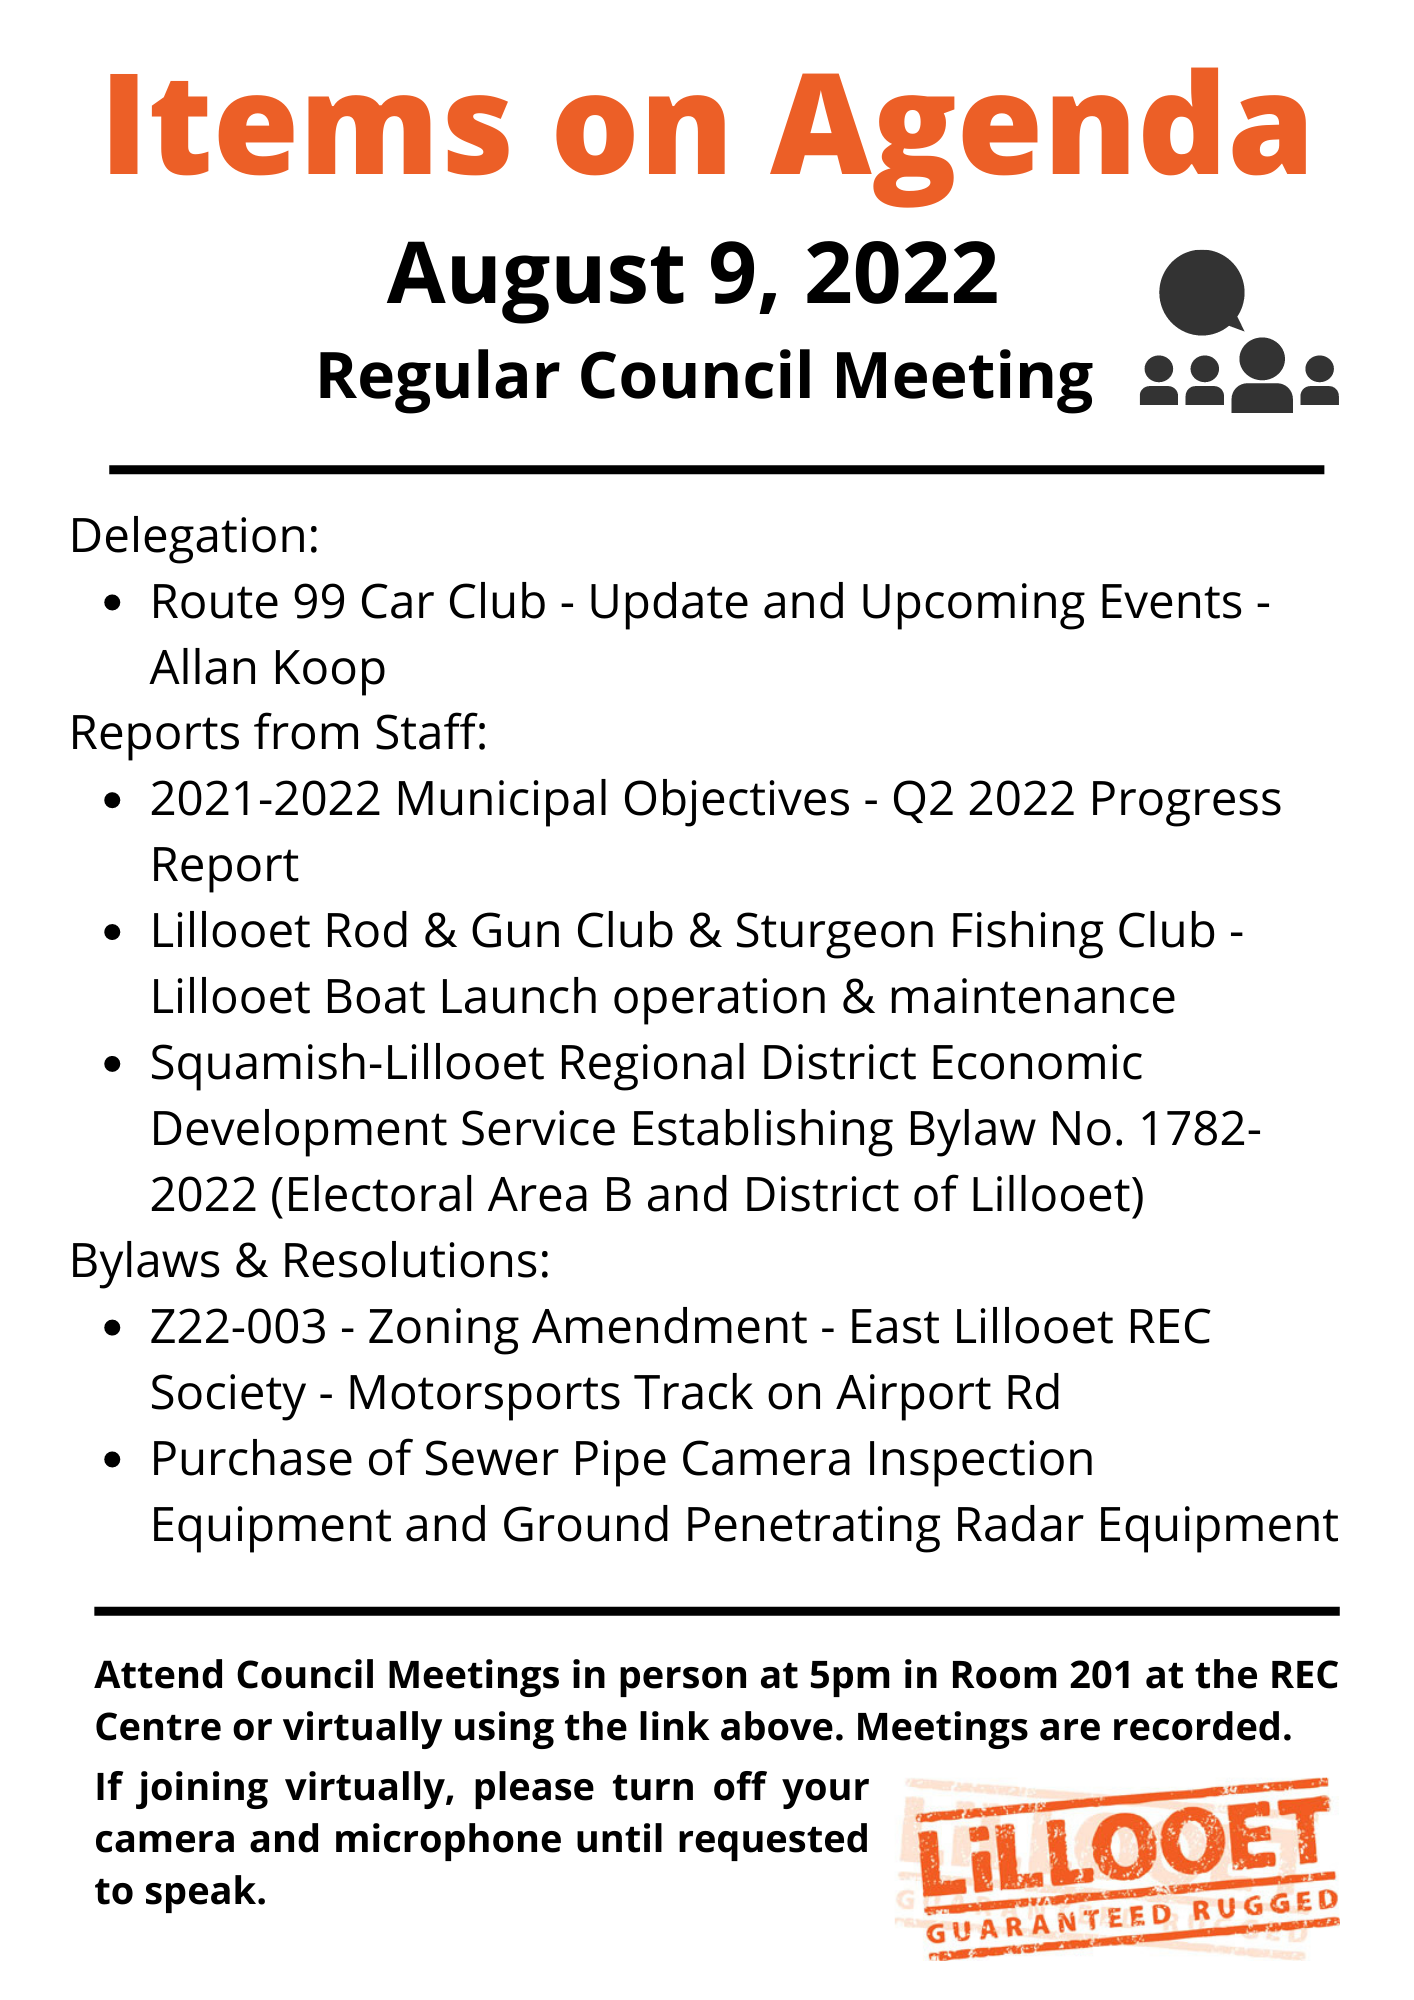 Items-on-Agenda-Aug-Council-Meeting.png